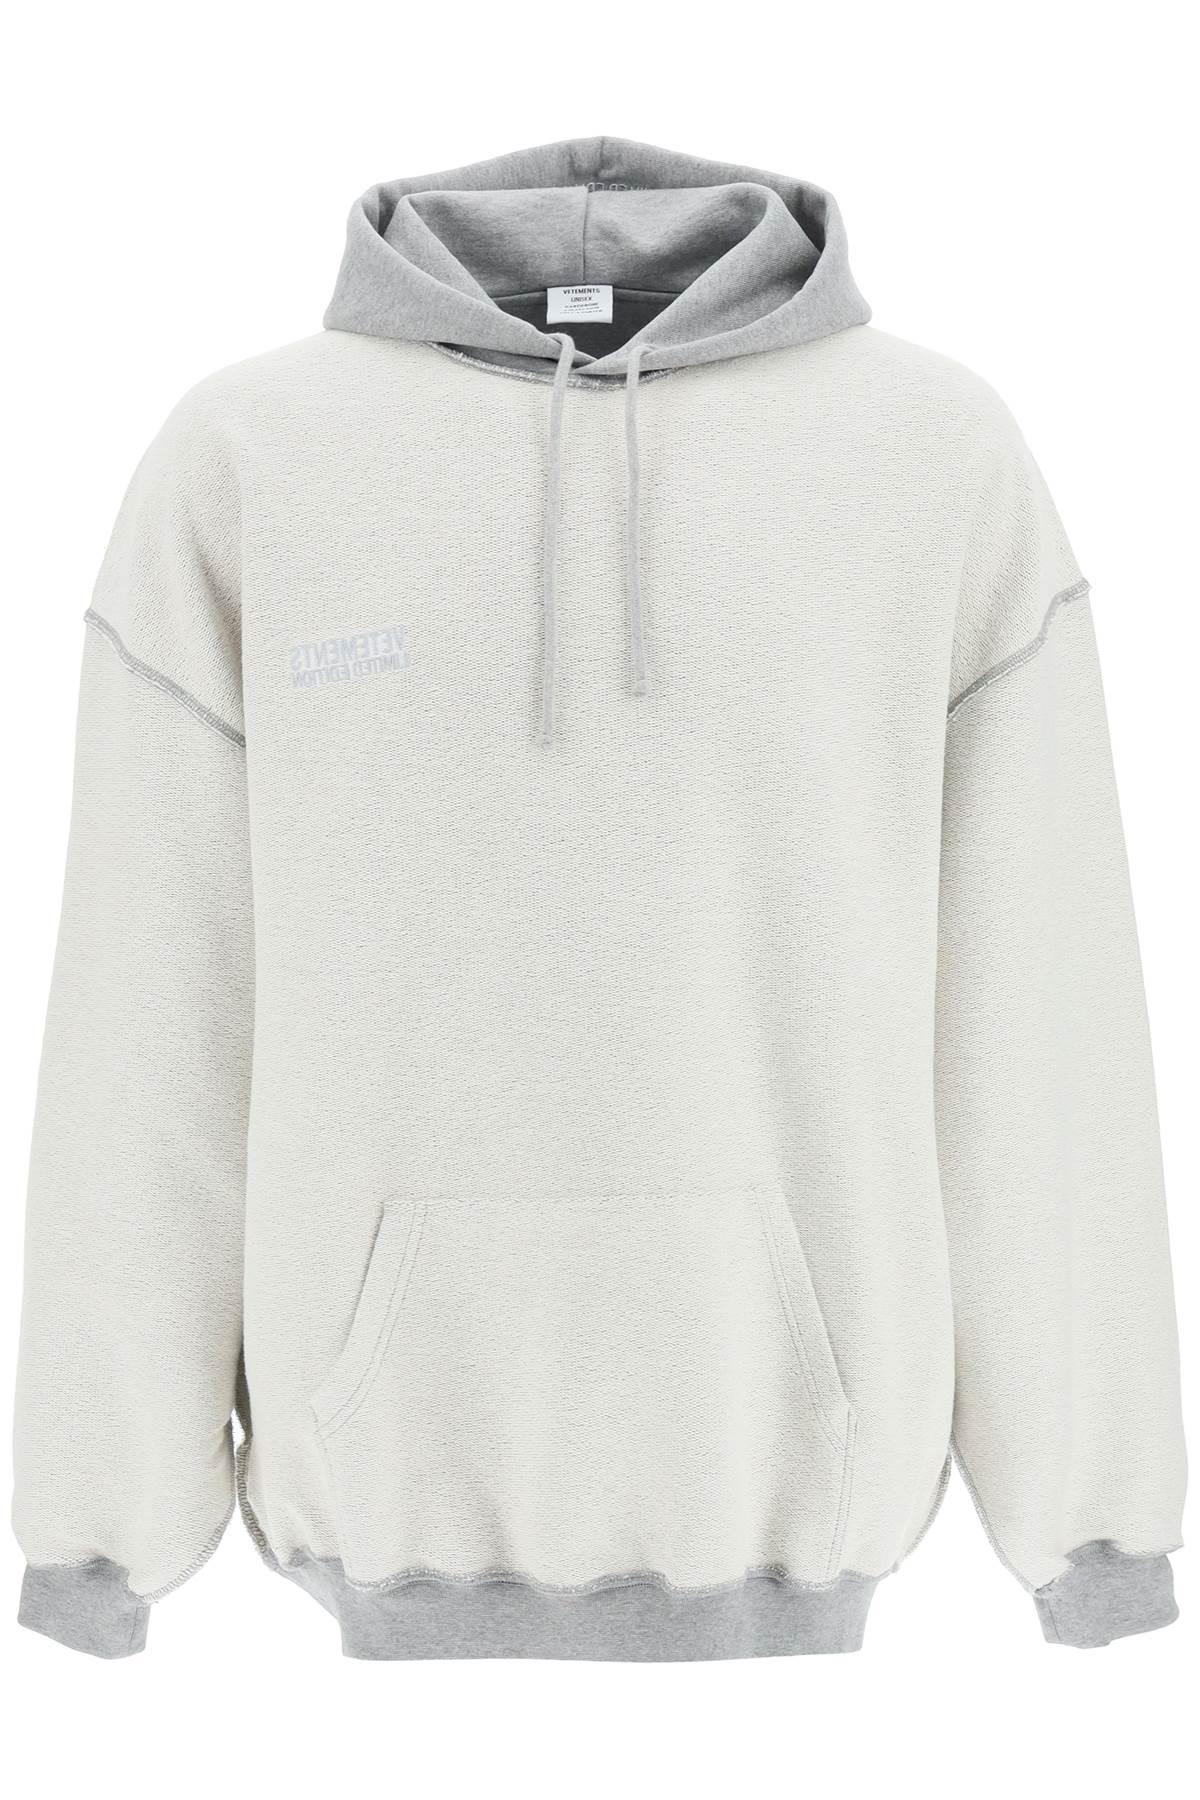 Vetements Inside-out Oversized Hoodie in White for Men | Lyst